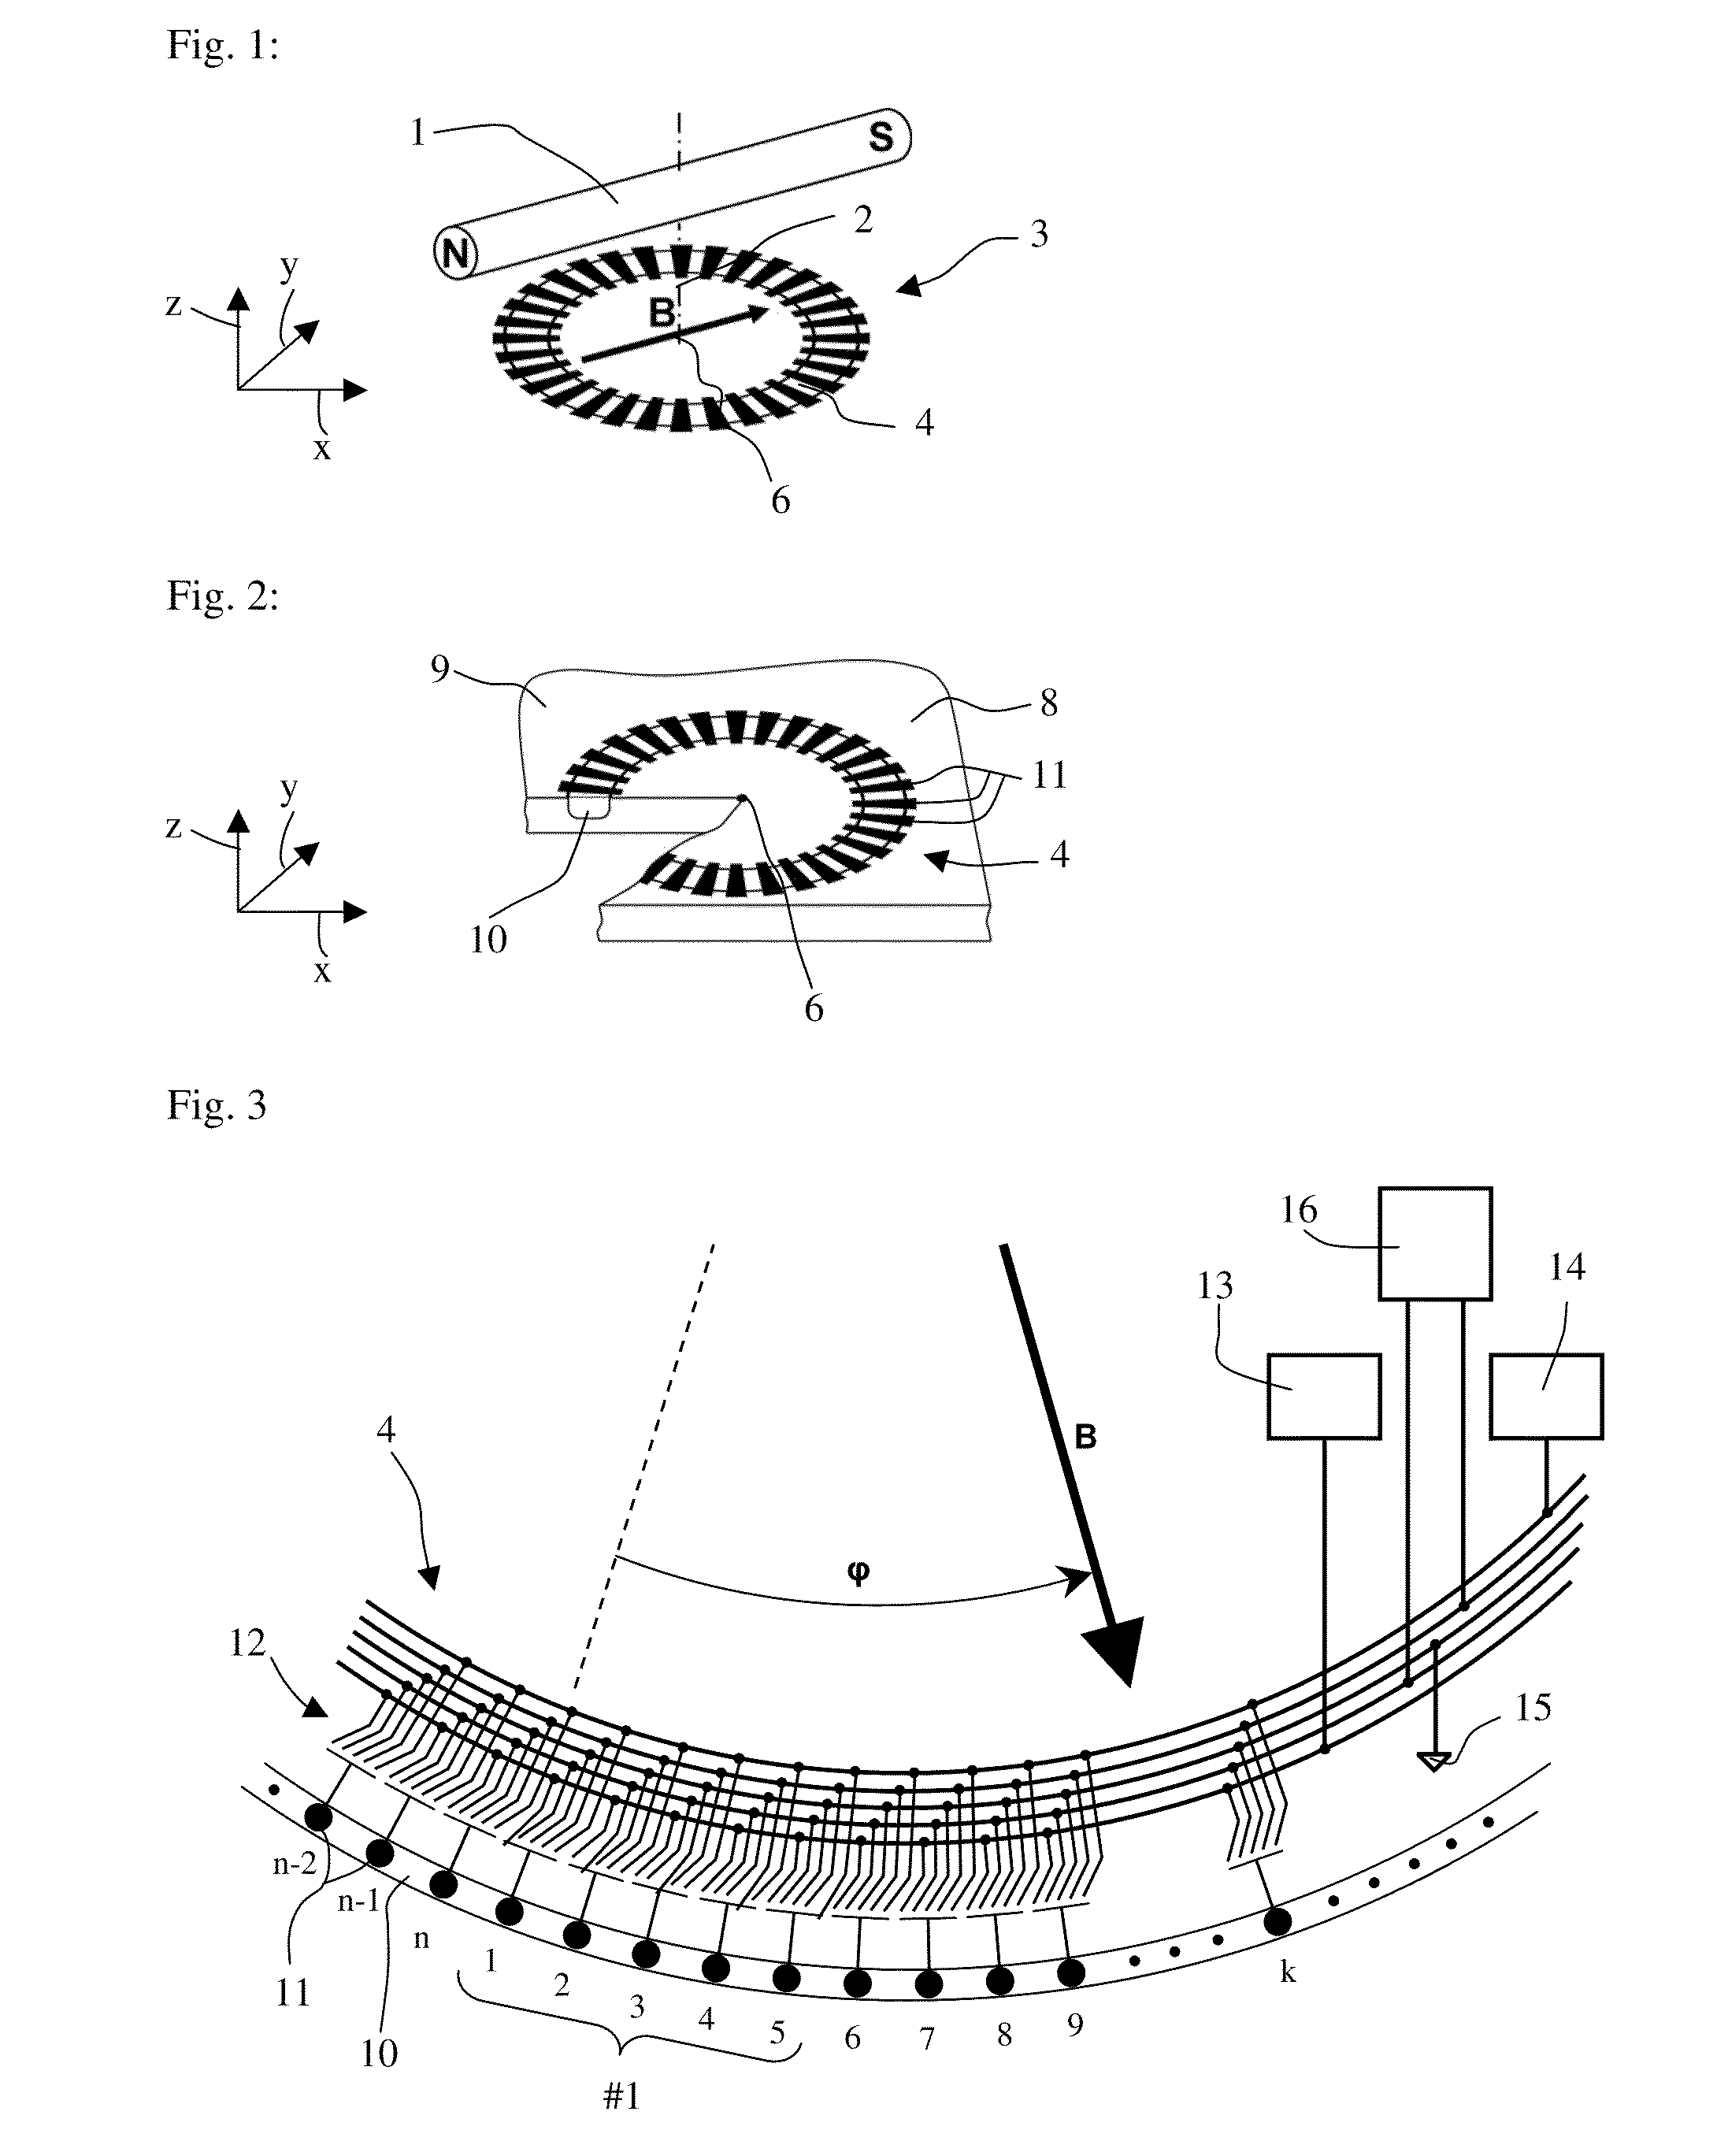 Magnetic Field Sensor For Measuring A Direction Of A Magnetic Field In A Plane